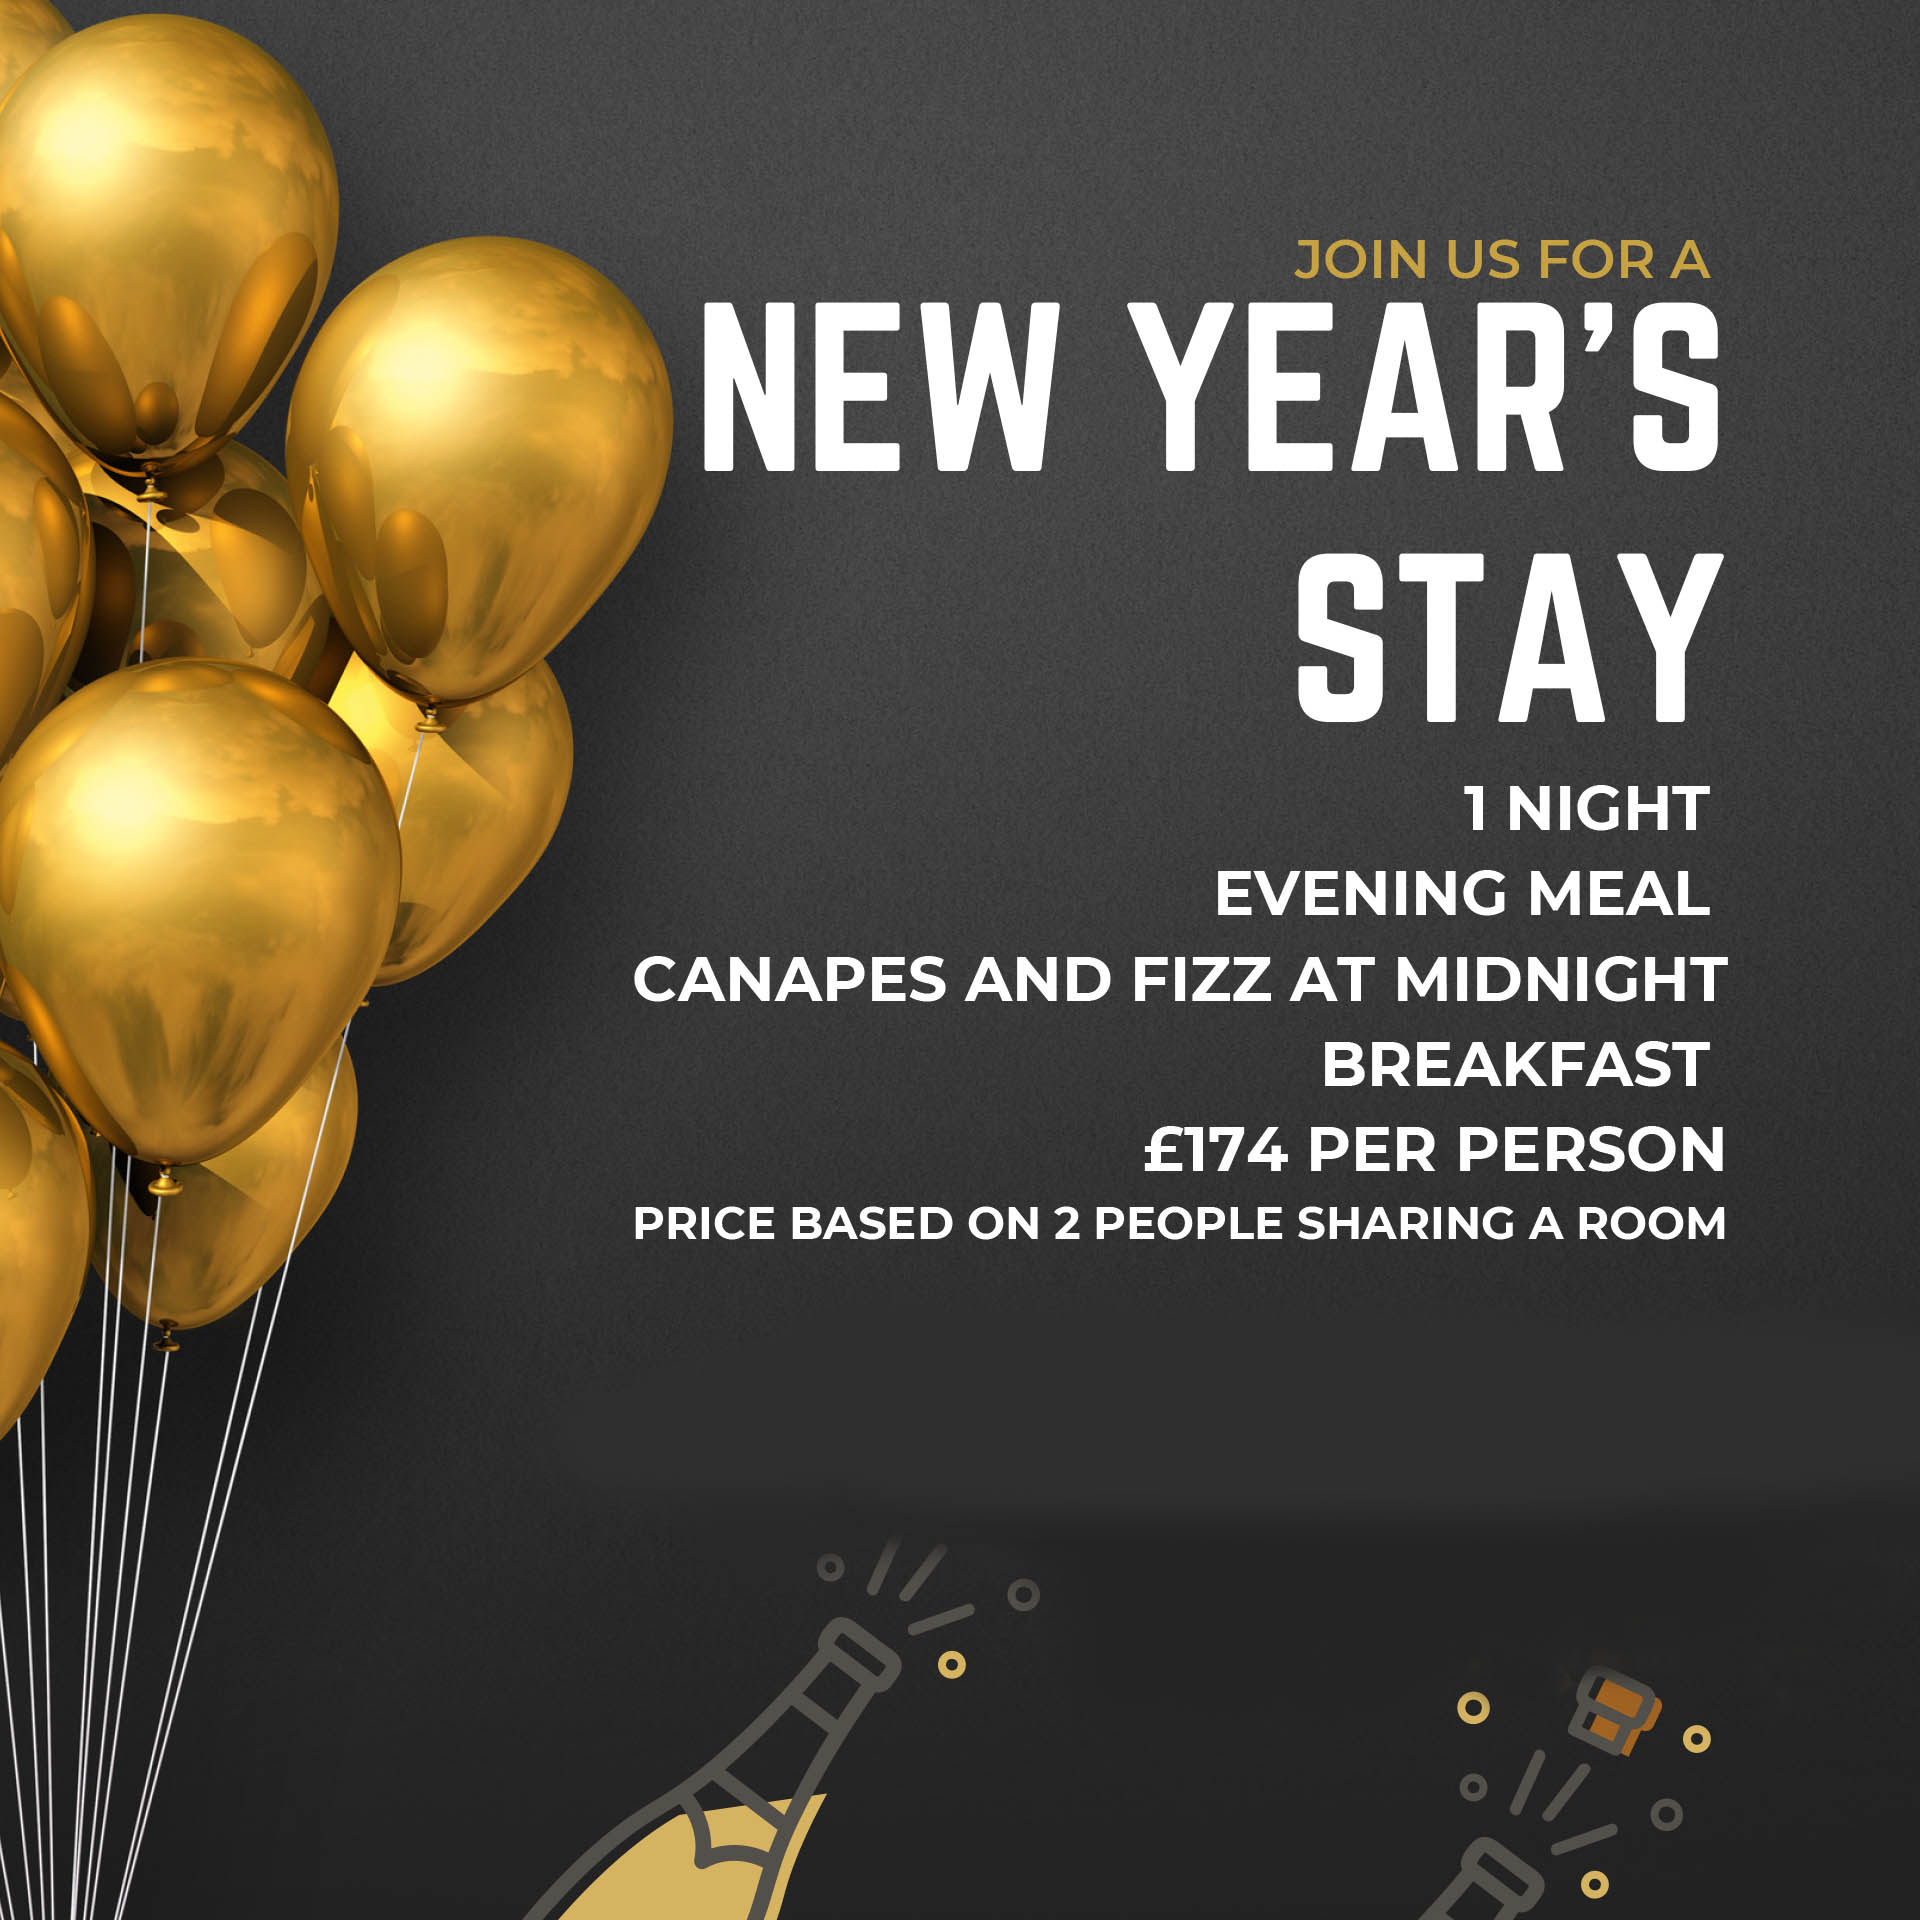 New year's Eve stay at the Dartmouth Hotel Golf & Spa